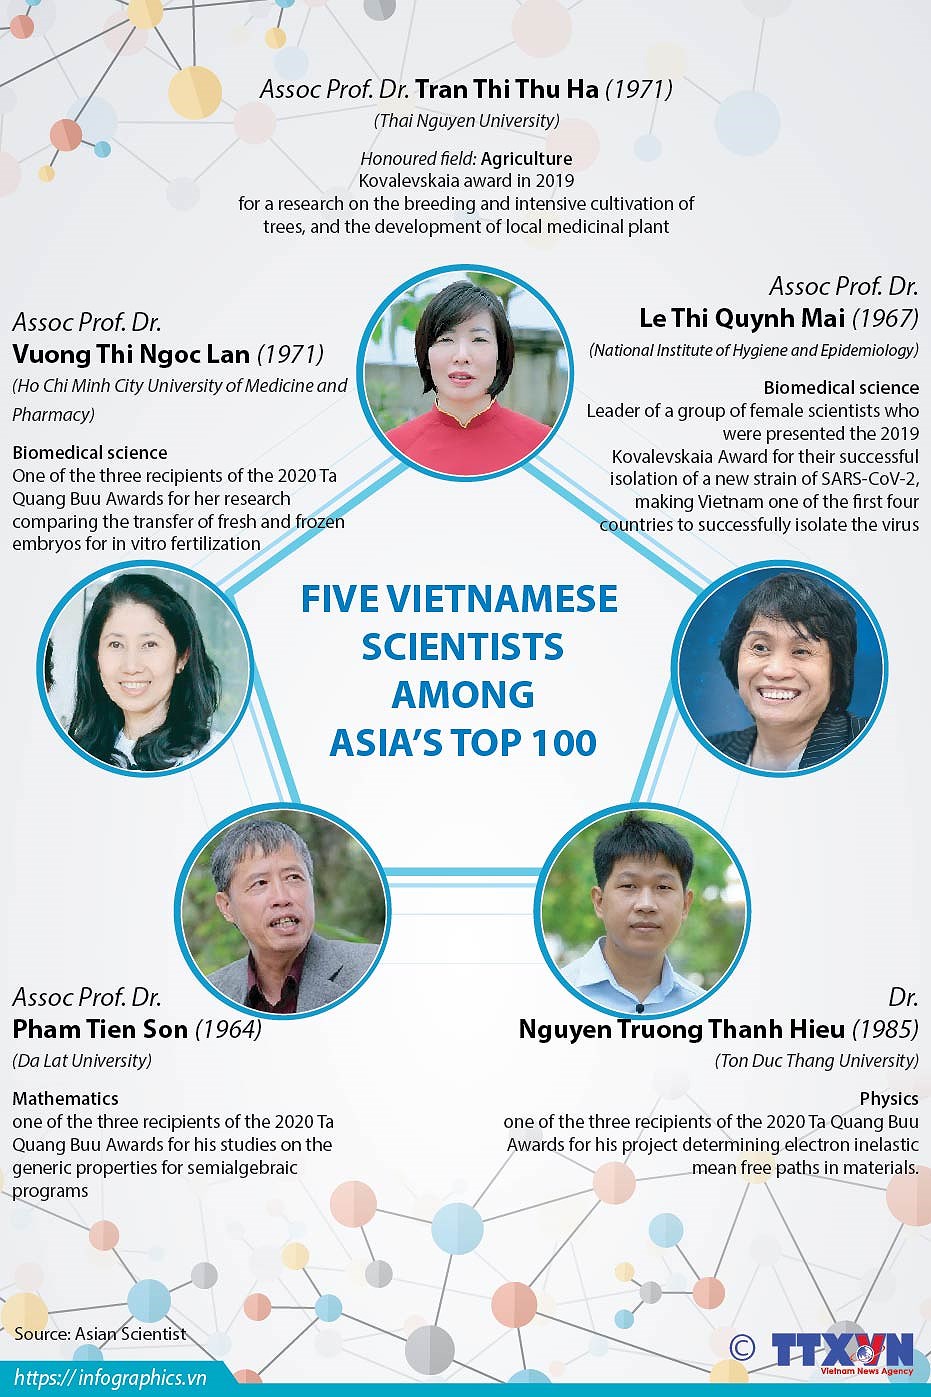 Five Vietnamese scientists among Asia's top 100 hinh anh 1